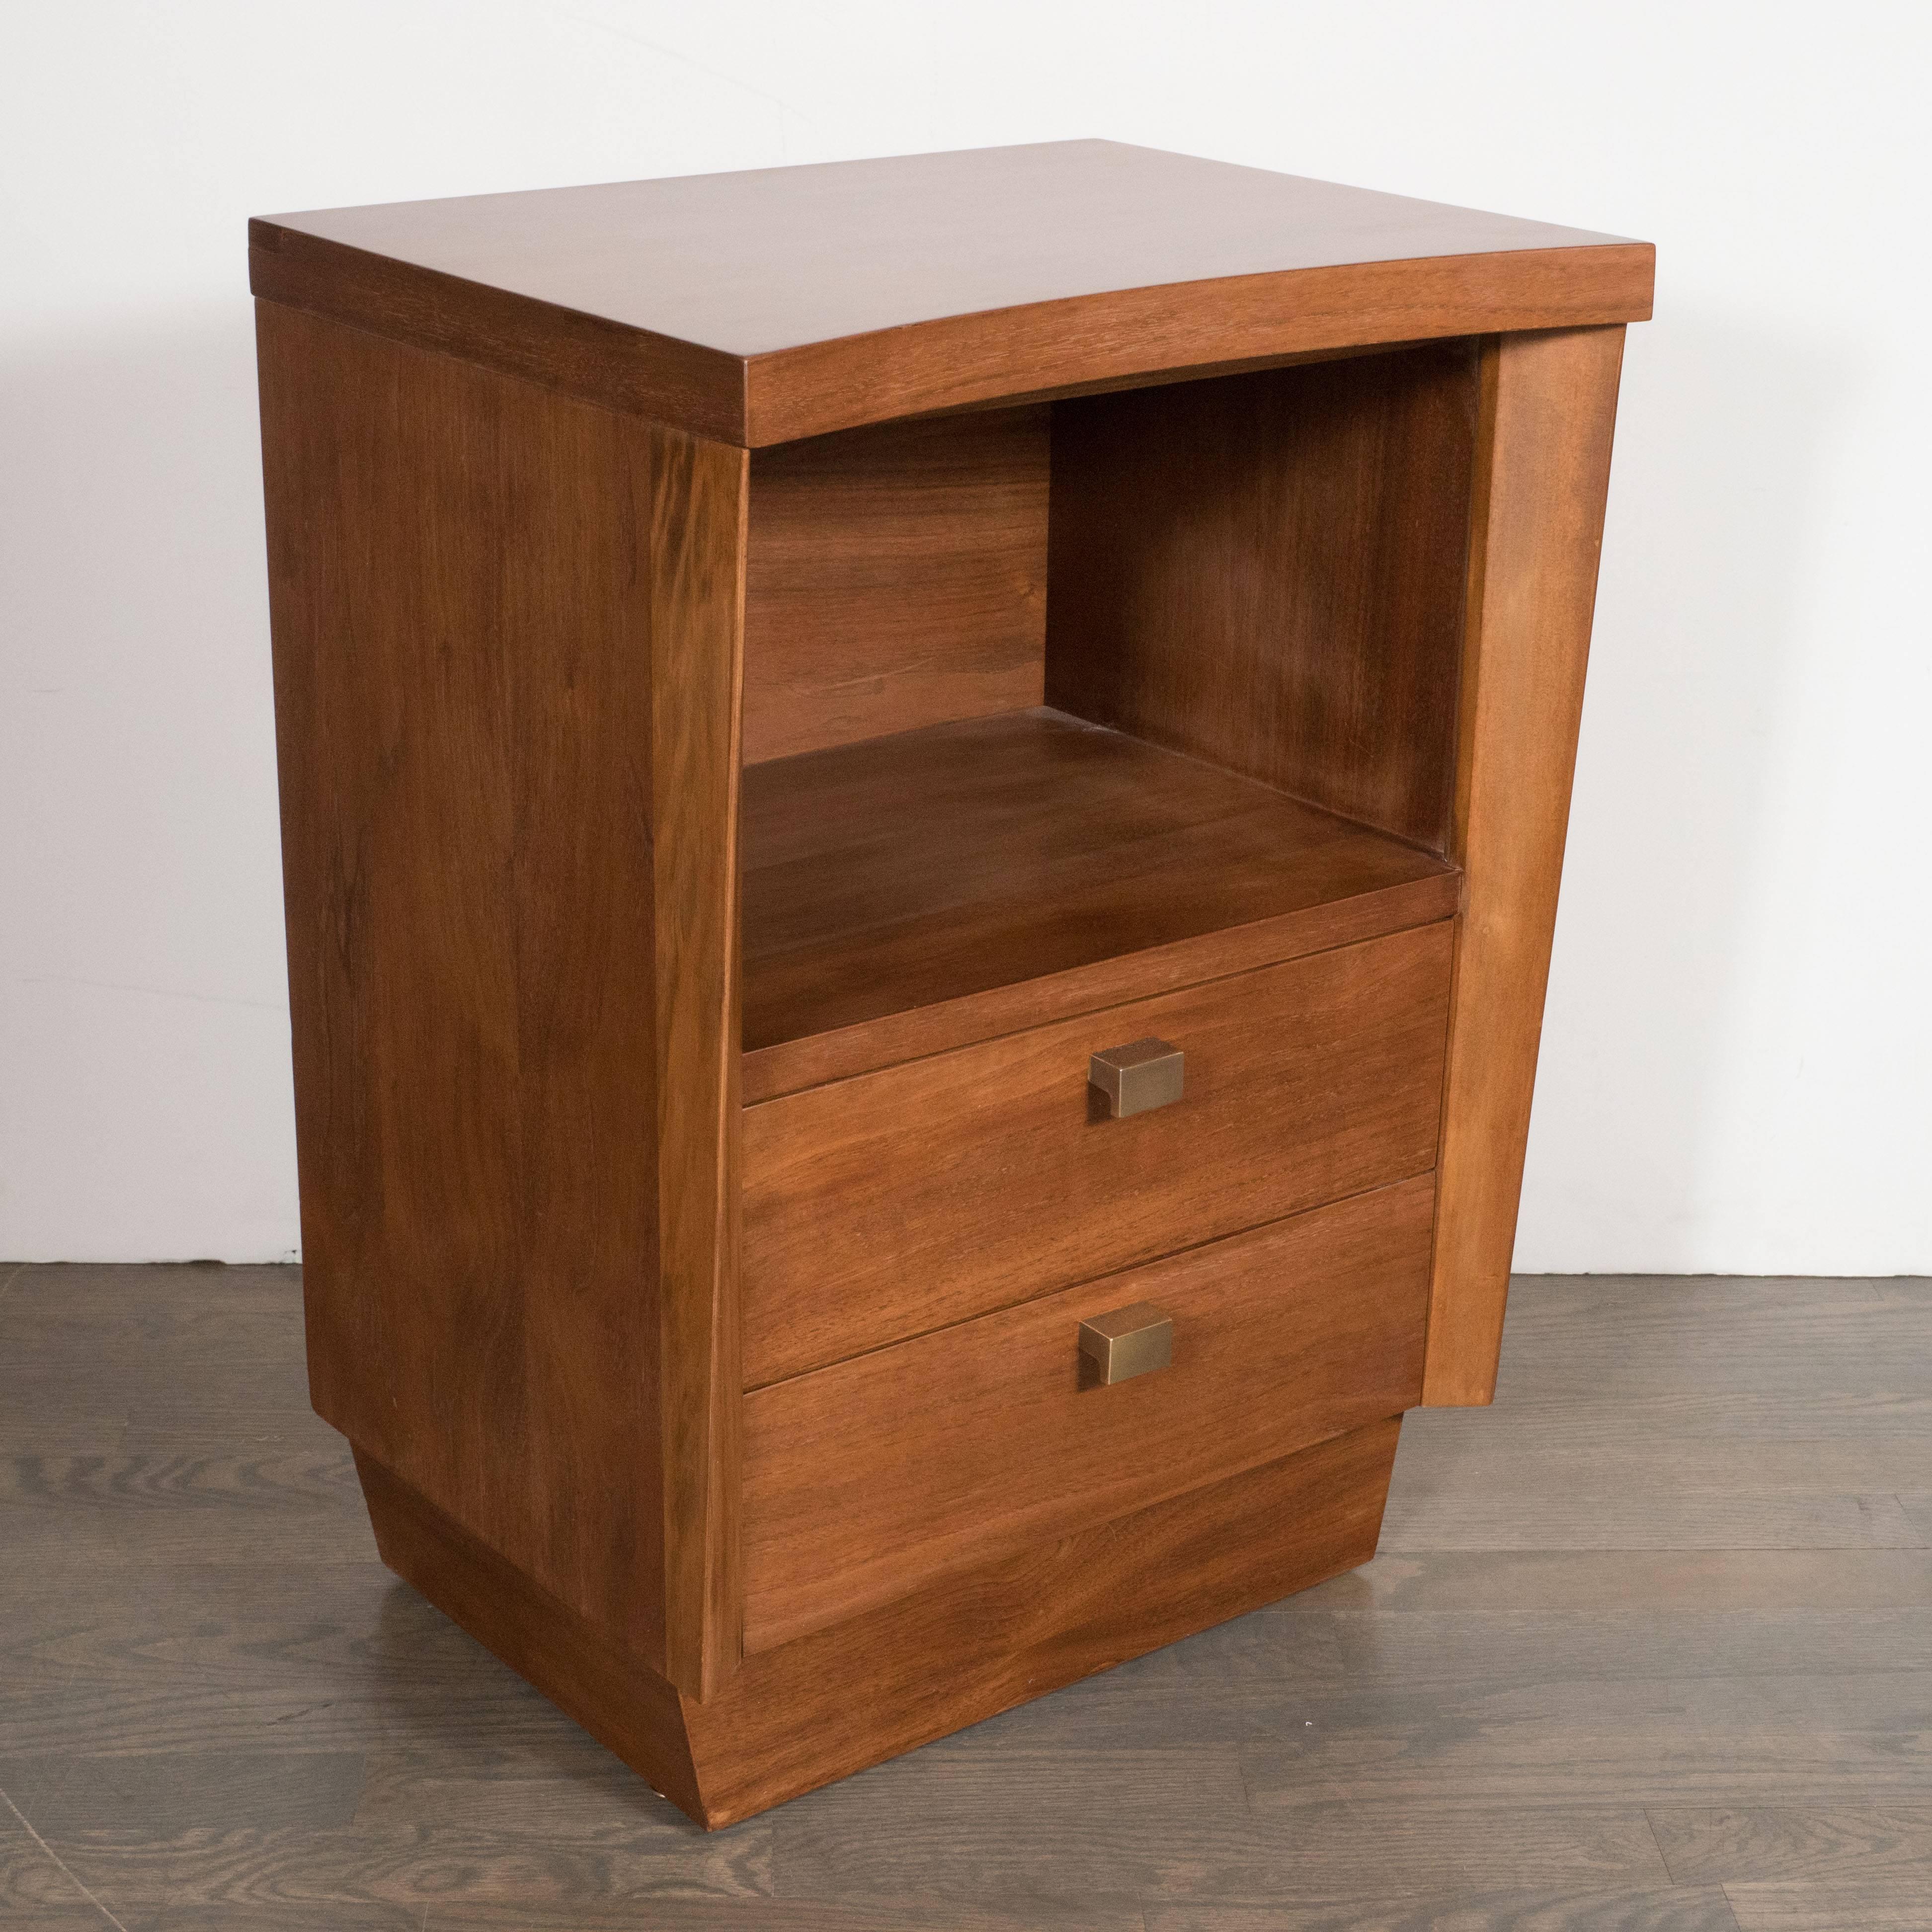 This stunning pair of nightstands in hand-rubbed walnut features a concave cut top, L-shaped brass pulls and integrated open shelves perfect for books or other precious items. The clean design and color palate, consisting of sumptuous polished brass